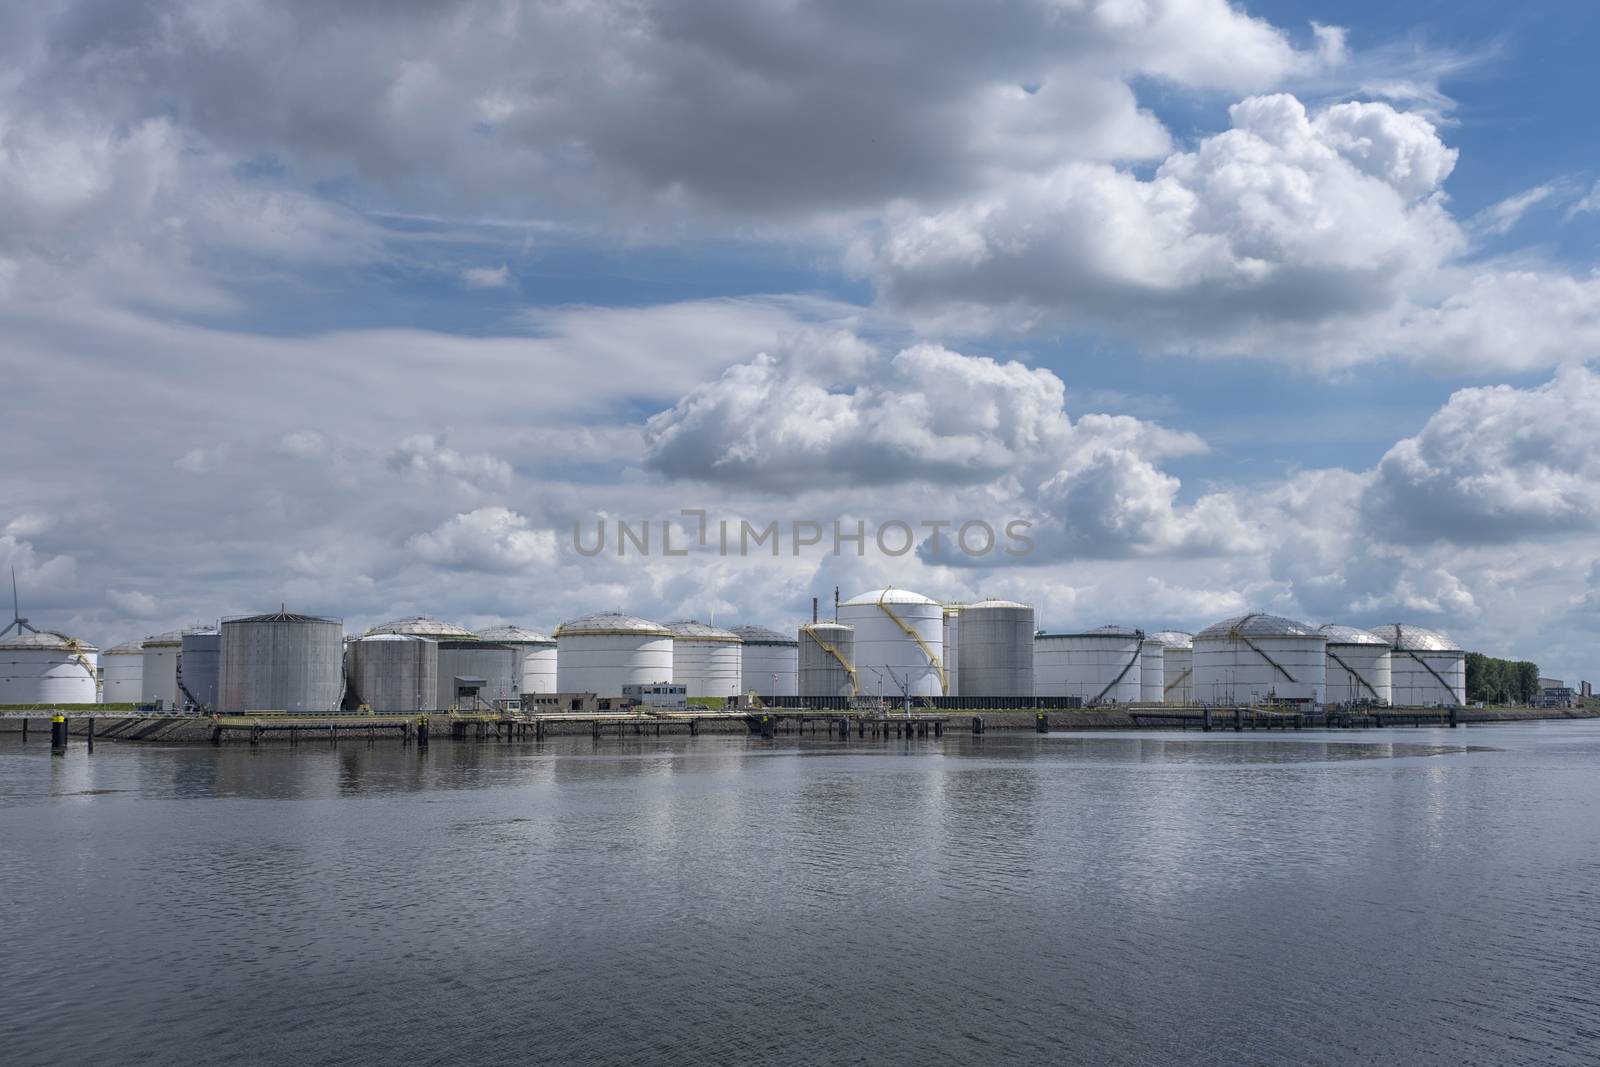 Tanker and oil storage tanks in Rotterdam, Netherlands. The port is the largest in Europe and facilitate the needs of a hinterland with 40,000,000 consumers